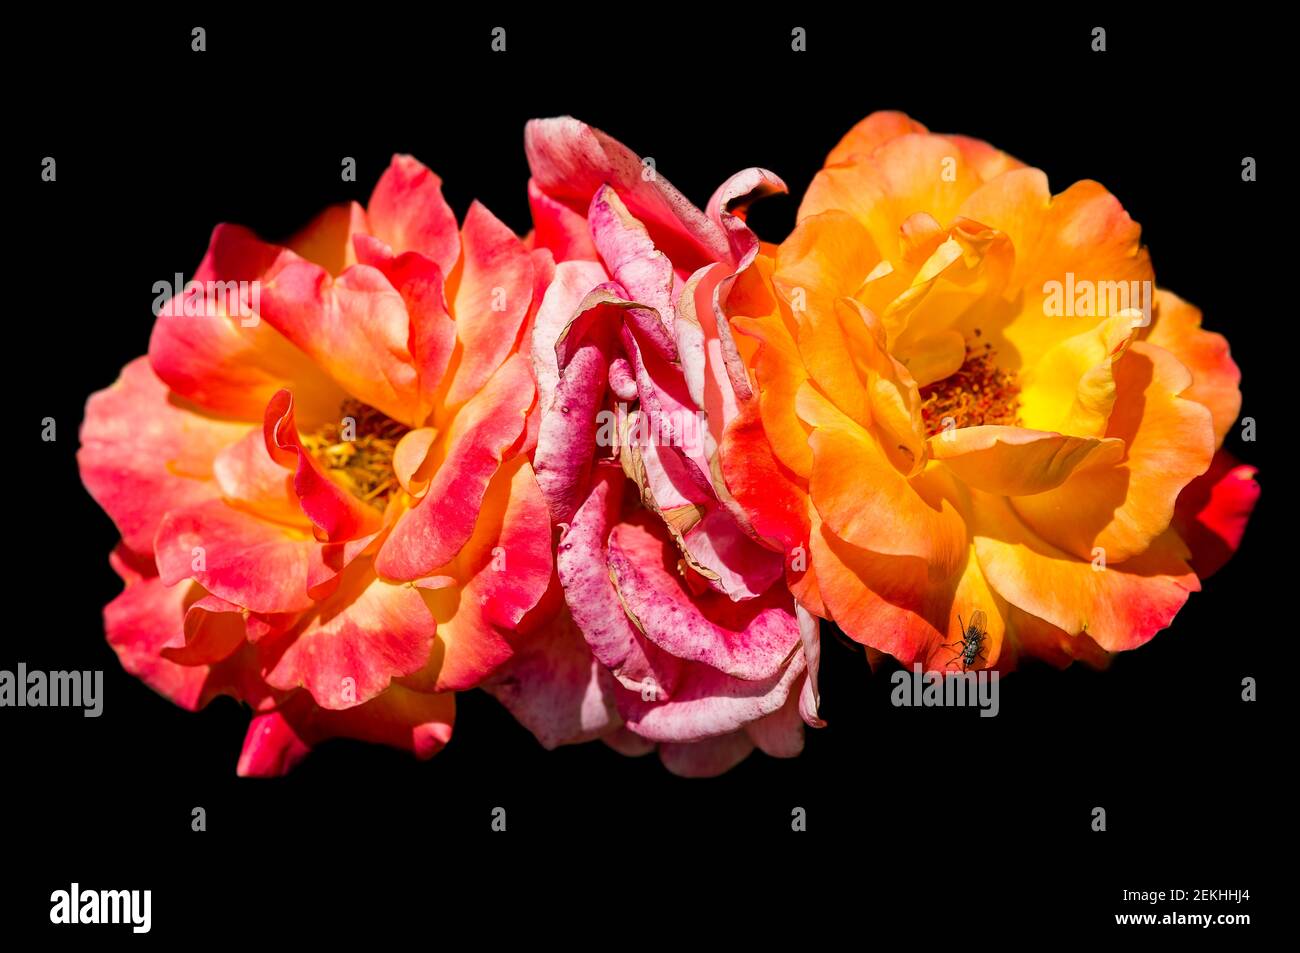 Close-up of three rose flowers against black background Stock Photo